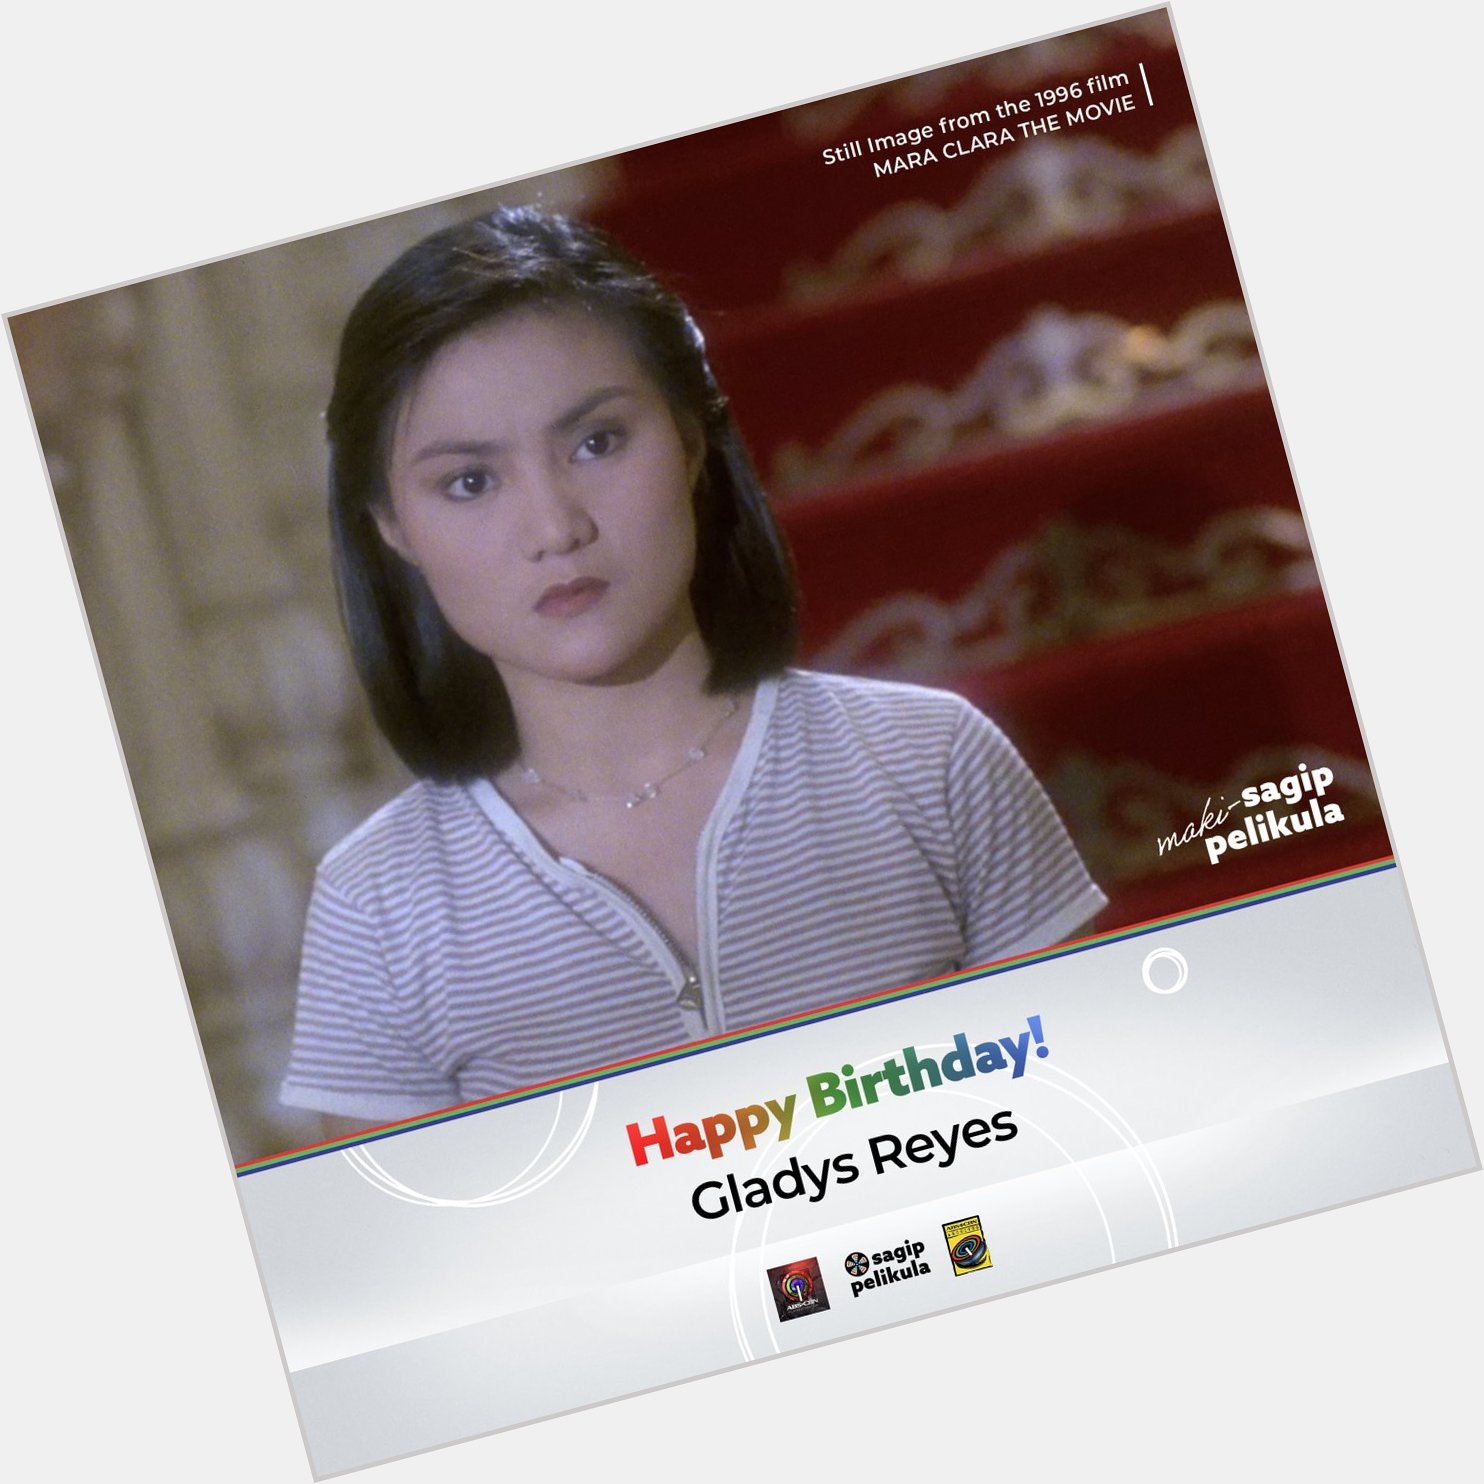 Happy birthday to Gladys Reyes!

What\s your favorite film of hers?   